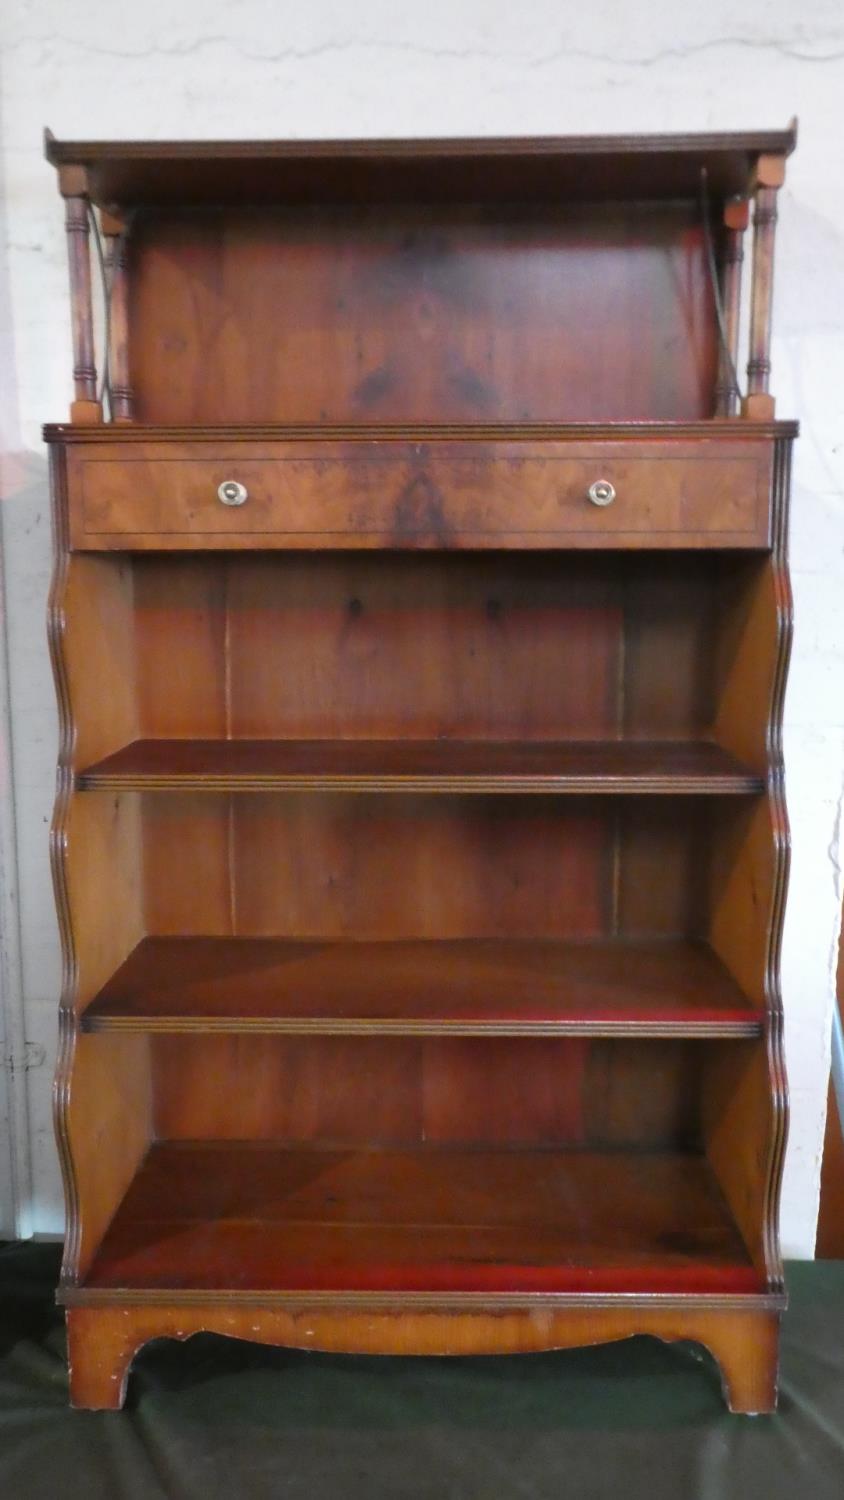 A Reproduction Waterfall Bookcase with Galleried Top, Single Long Drawer, Three Shelves Under, - Image 2 of 2